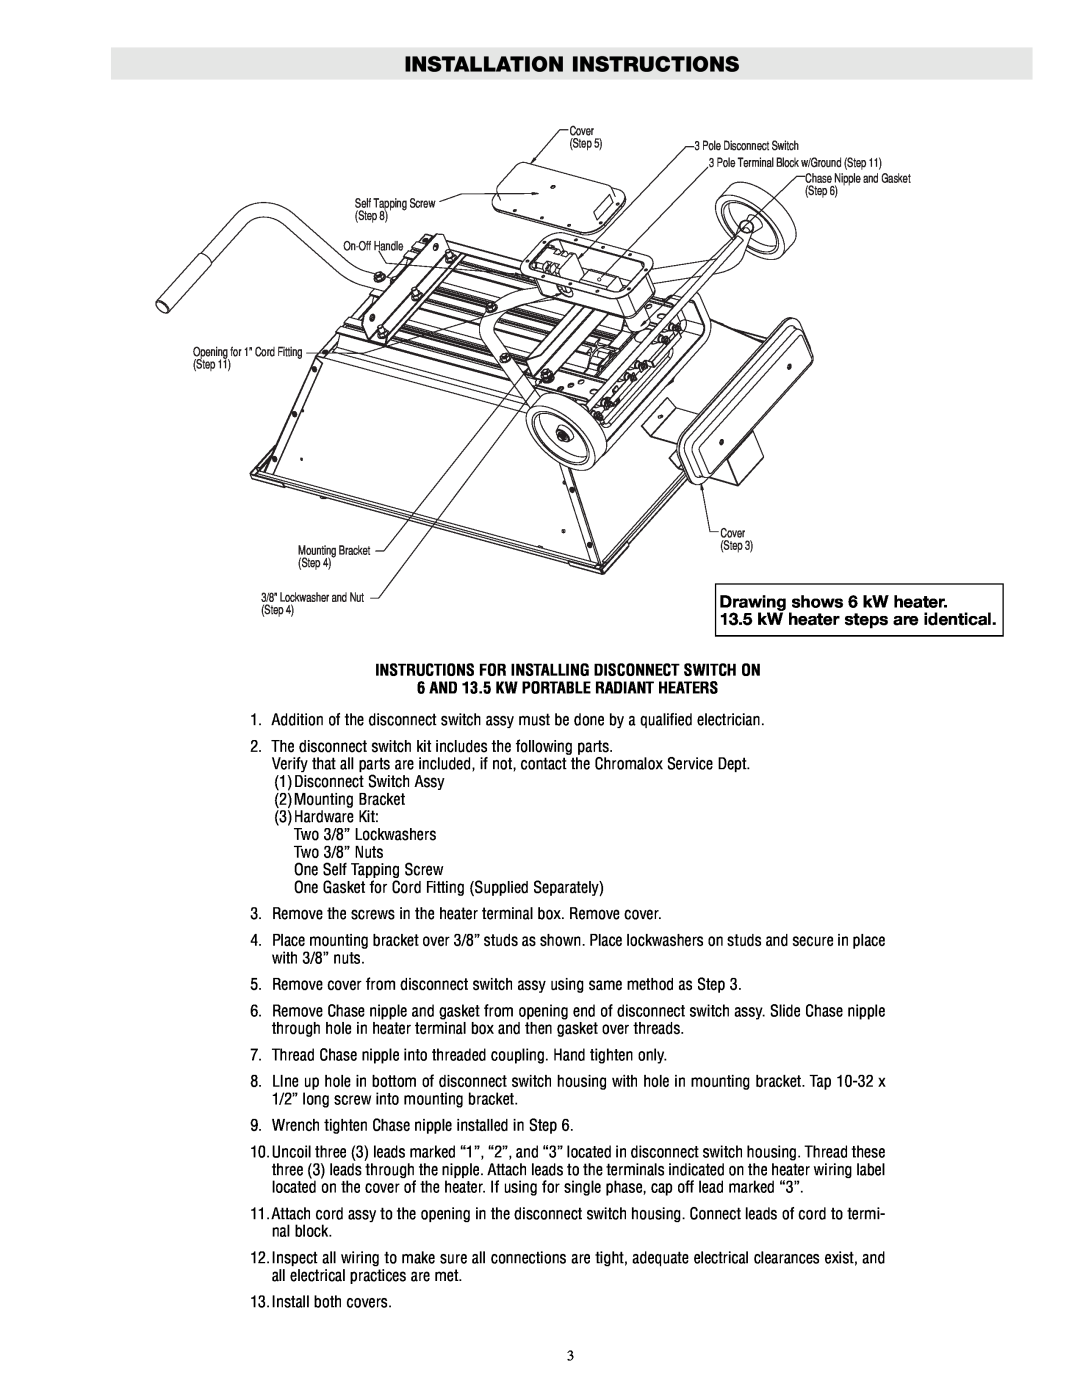 Chromalox DS-50600 Installation Instructions, Drawing shows 6 kW heater, kW heater steps are identical 